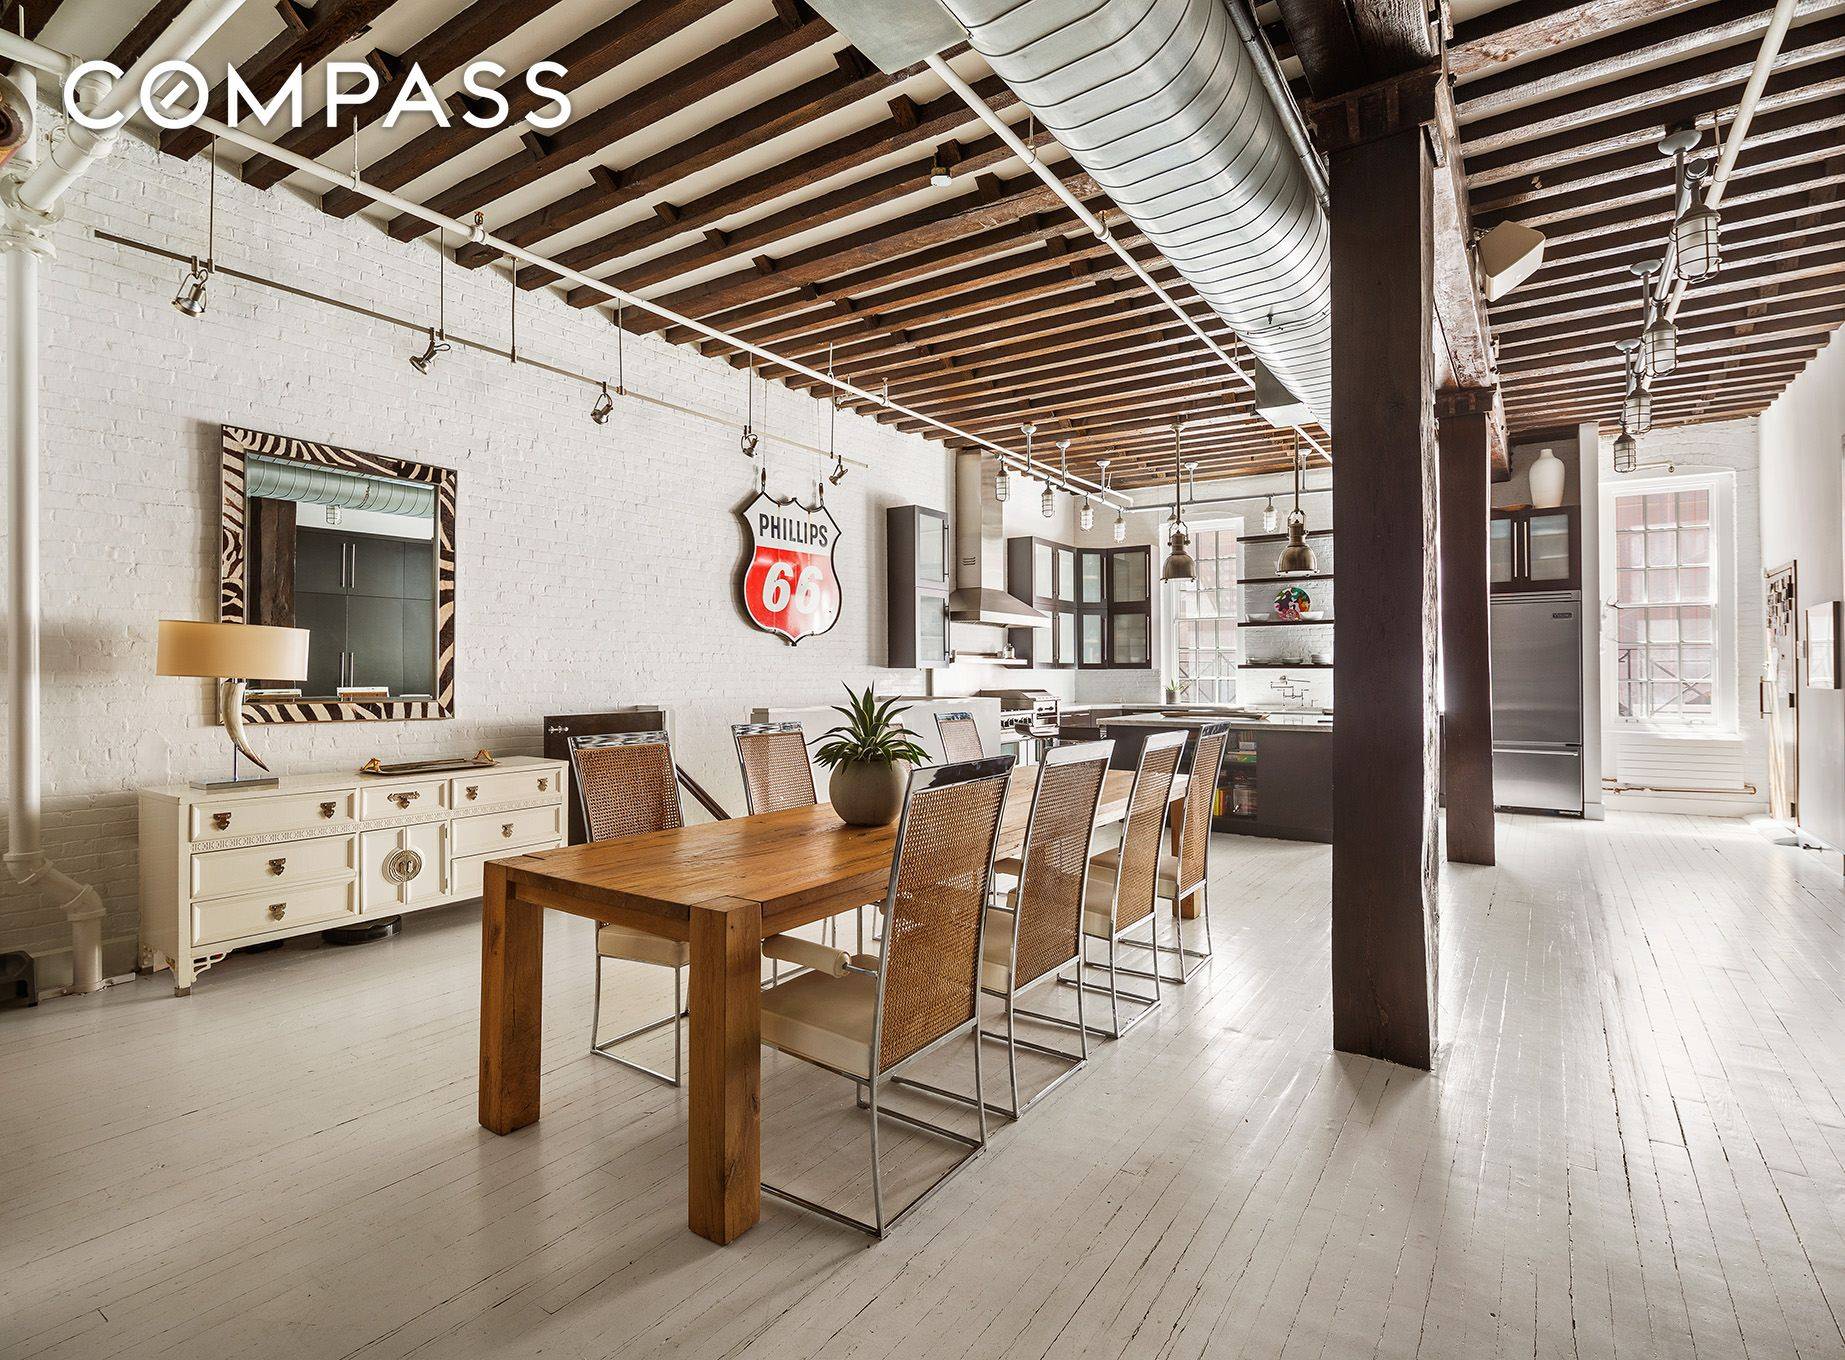 A genuine loft situated on a picturesque cobblestone street in TriBeCa's Historic District, Residence 2 at 18 Desbrosses Street is a two bedroom full floor home with 12 ceilings and ...